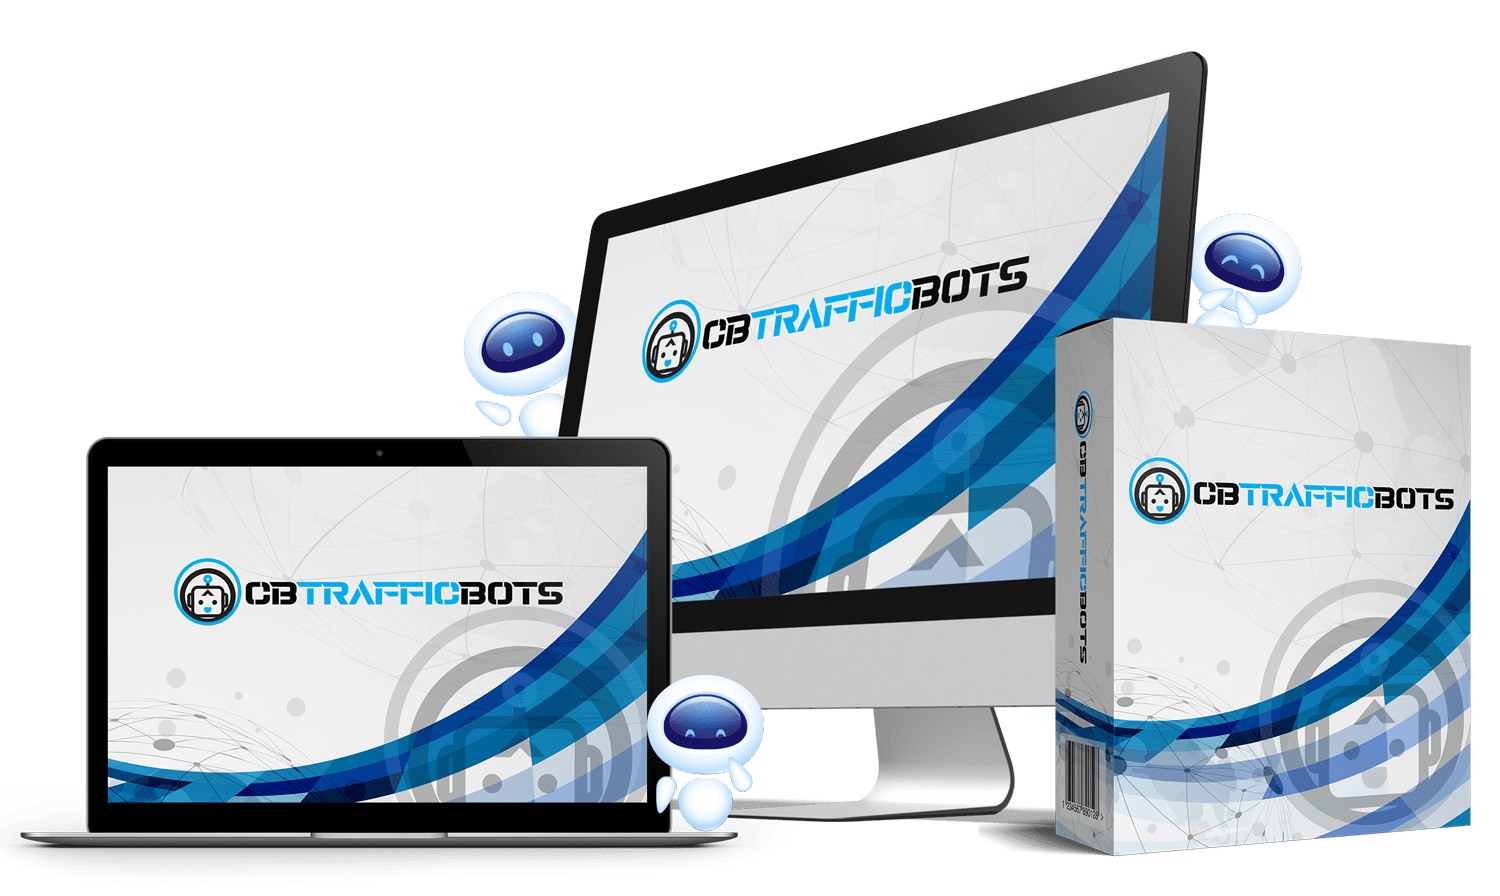 [GET] CB TrafficBots – Make 60x ClickBank Commissions Free Download